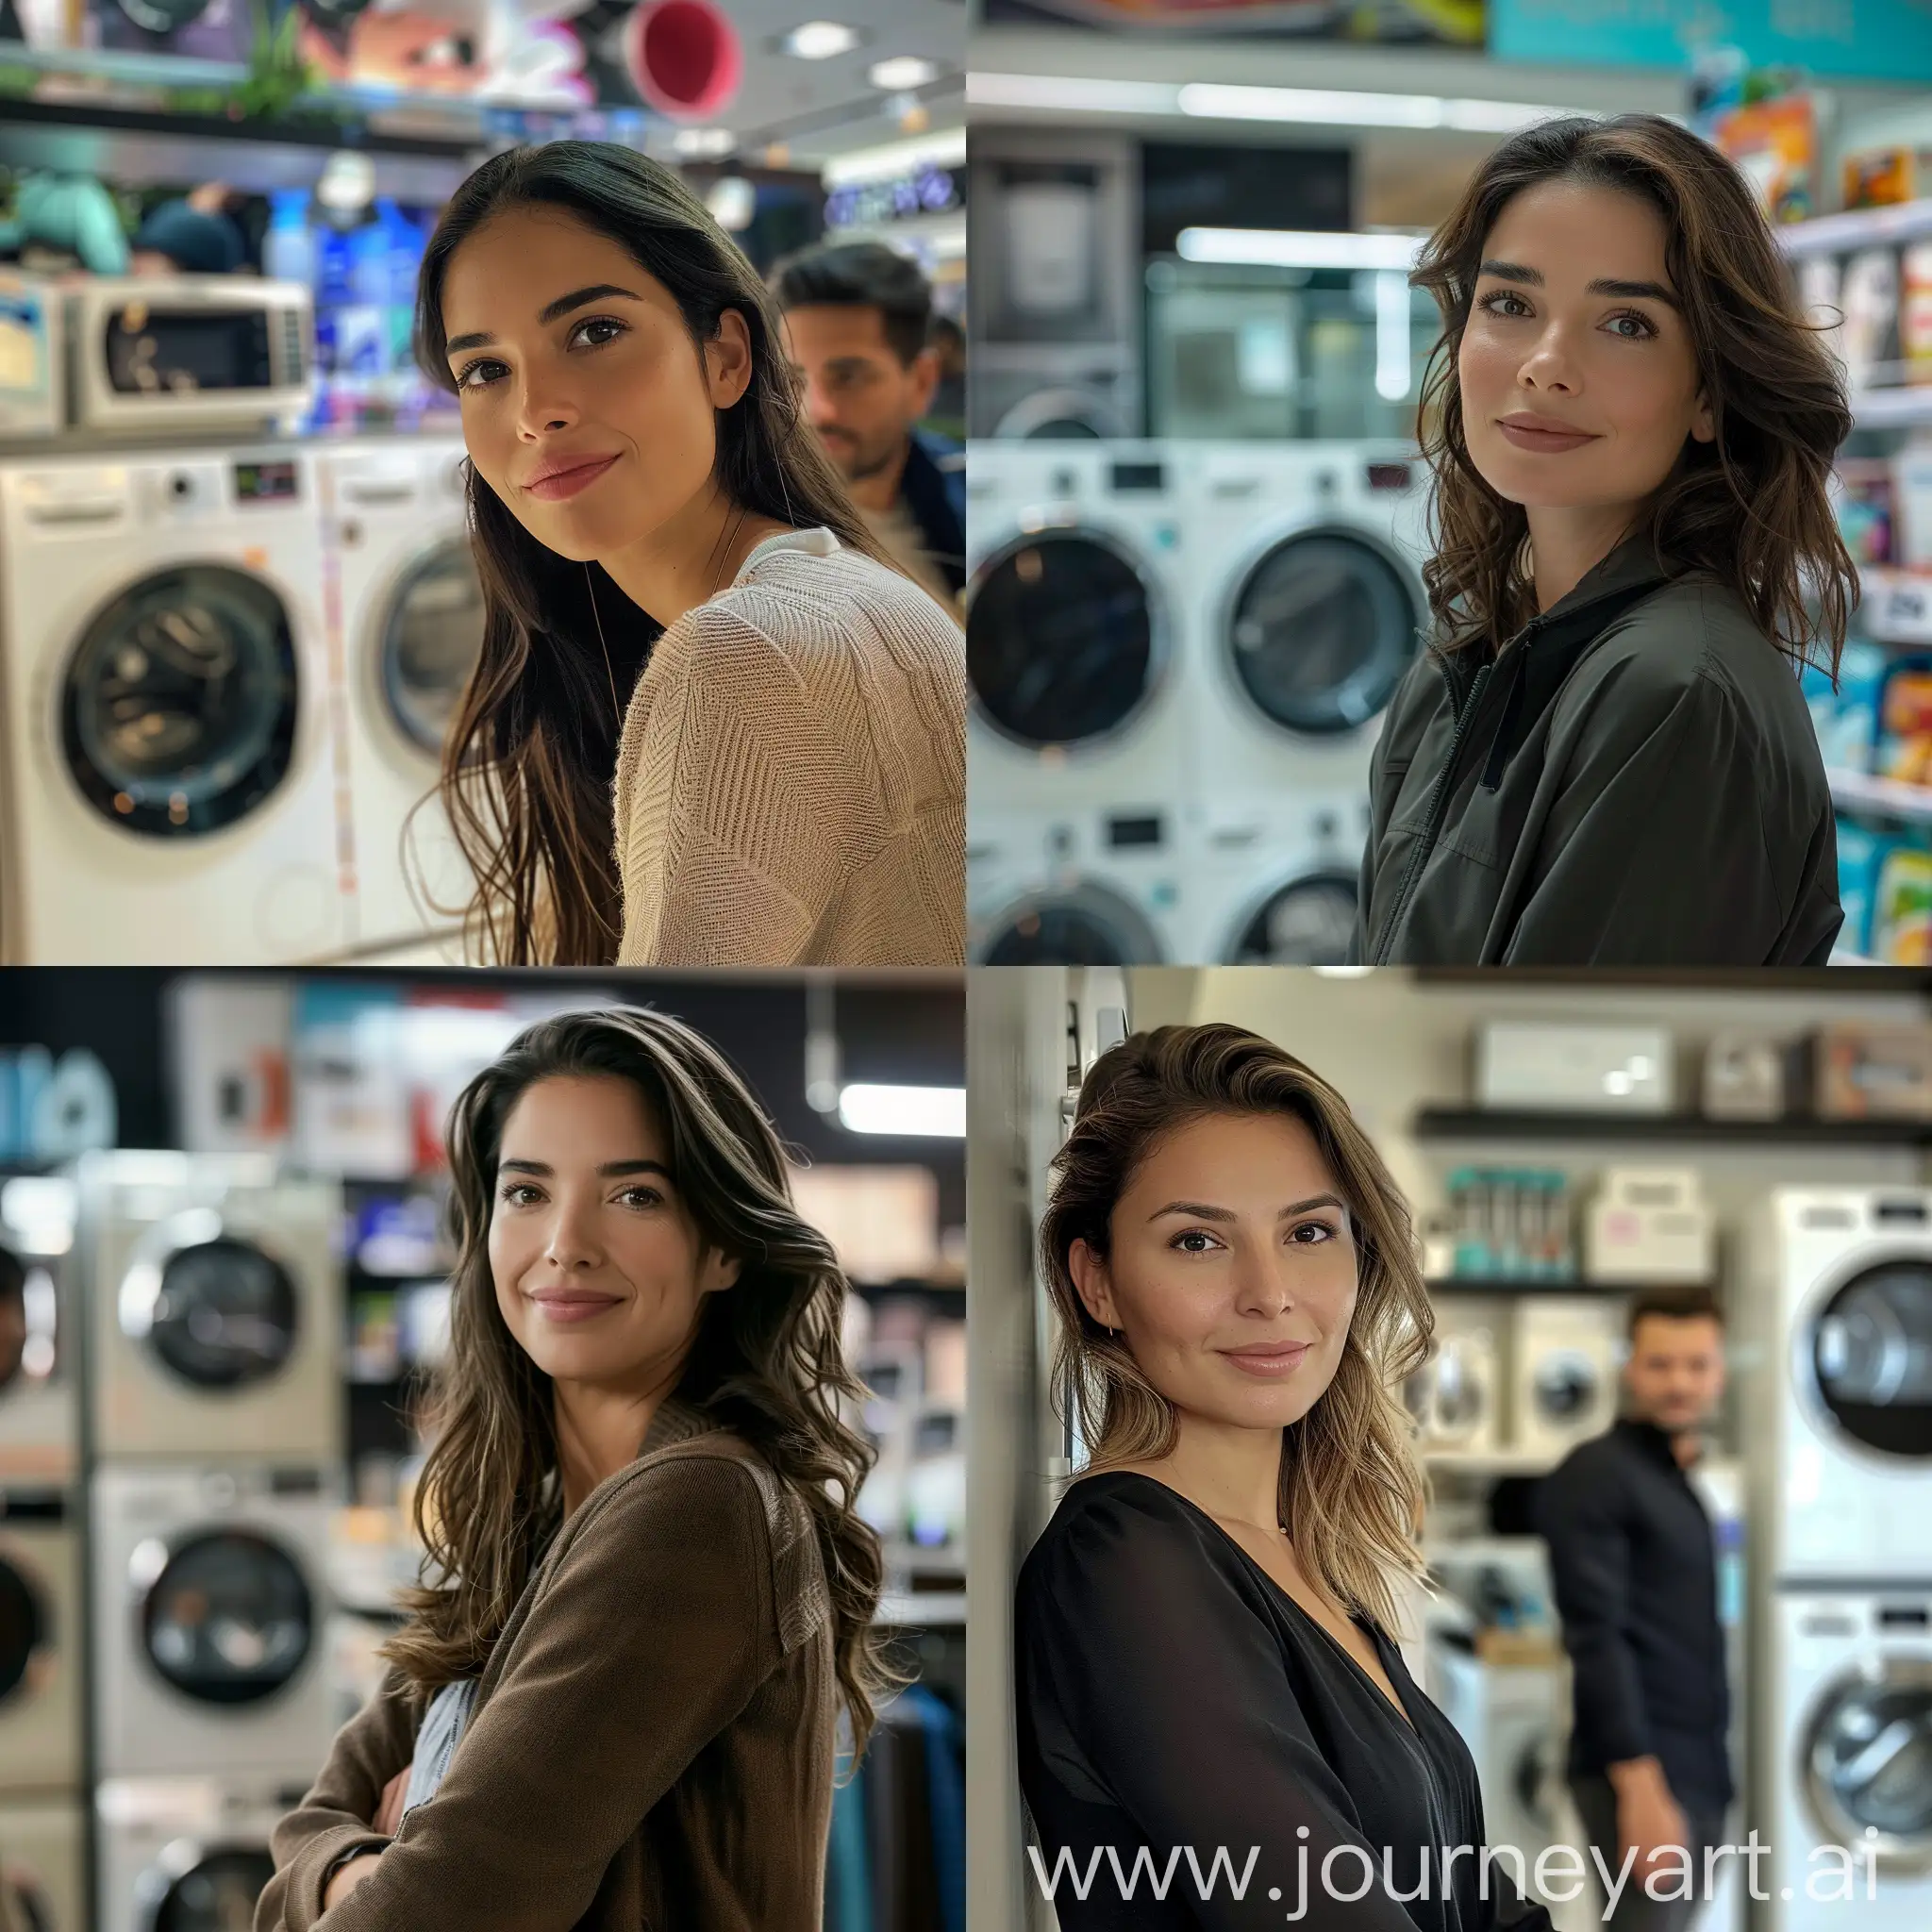 ana de armas actor is waiting for her husband to buy in a home appliance store, looking at the camera and smiling. Behind him is an image of a home appliances store washing machine refrigerator, high quality, super real, with calm colors.